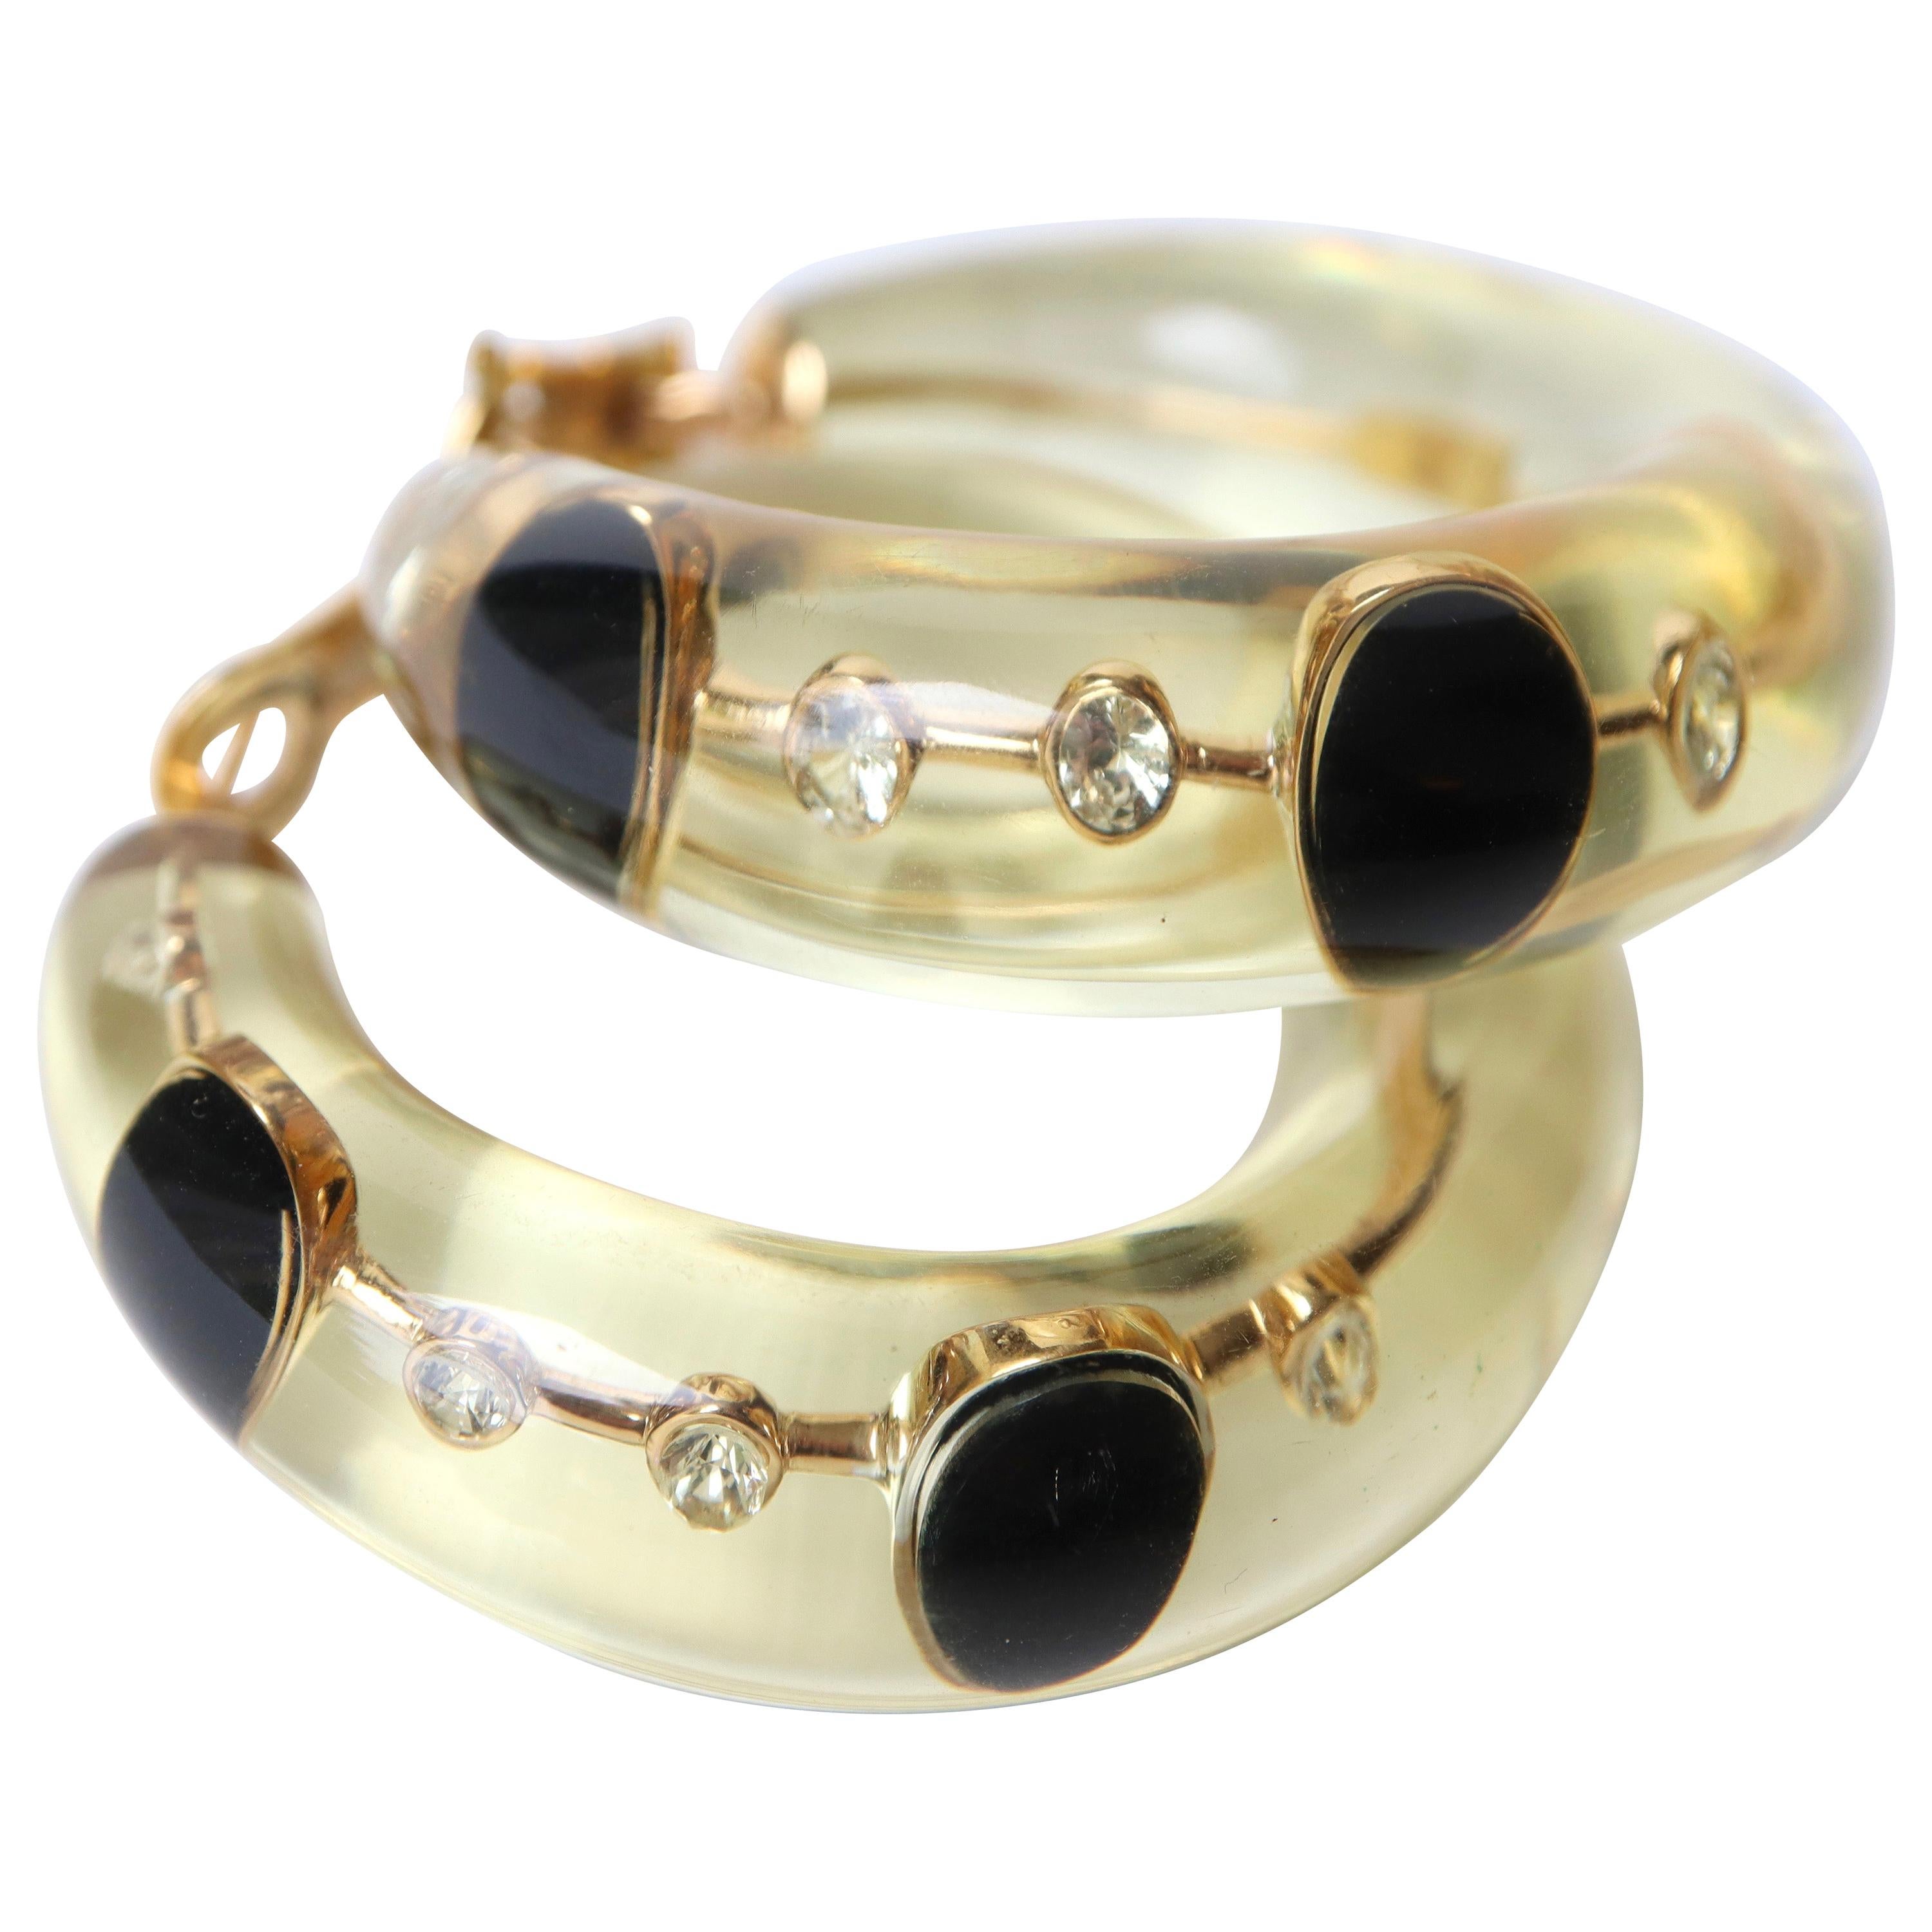 Pascal Morabito Hoop Earrings, 18 Karat Yellow Gold, Diamonds and Onyx in Resin For Sale